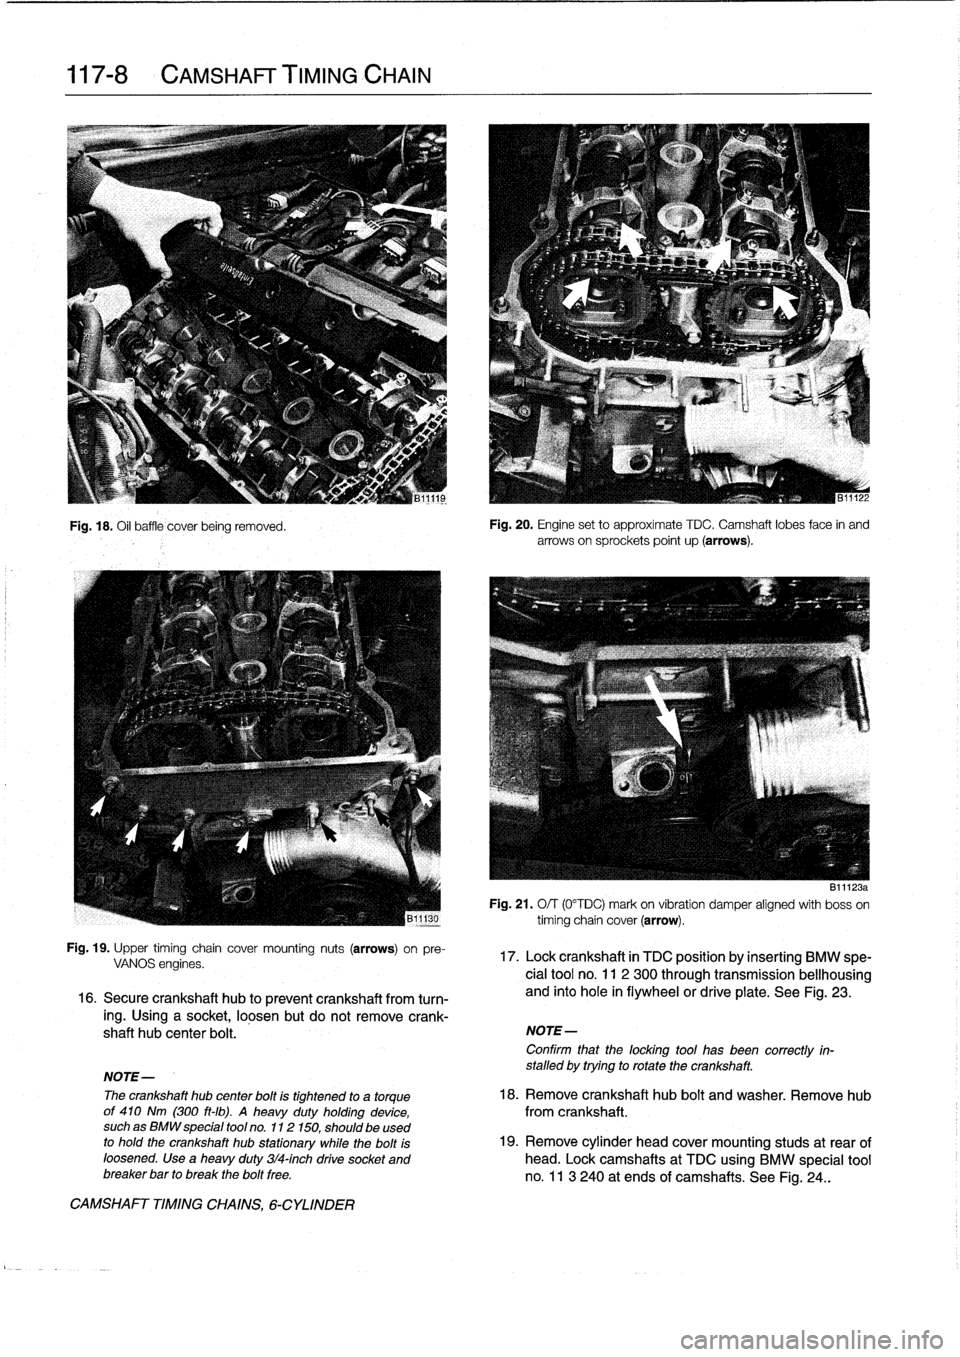 BMW 318i 1998 E36 Workshop Manual 
117-
8

	

CAMSHAFT
TIMING
CHAIN

Fig
.
18
.
Oil
baffle
cover
being
removed
.

Fig
.
19
.
Upper
timing
chaincover
mounting
nuts
(arrows)
on
pre-
VANOS
engines
.

16
.
Secure
crankshaft
hub
to
preven